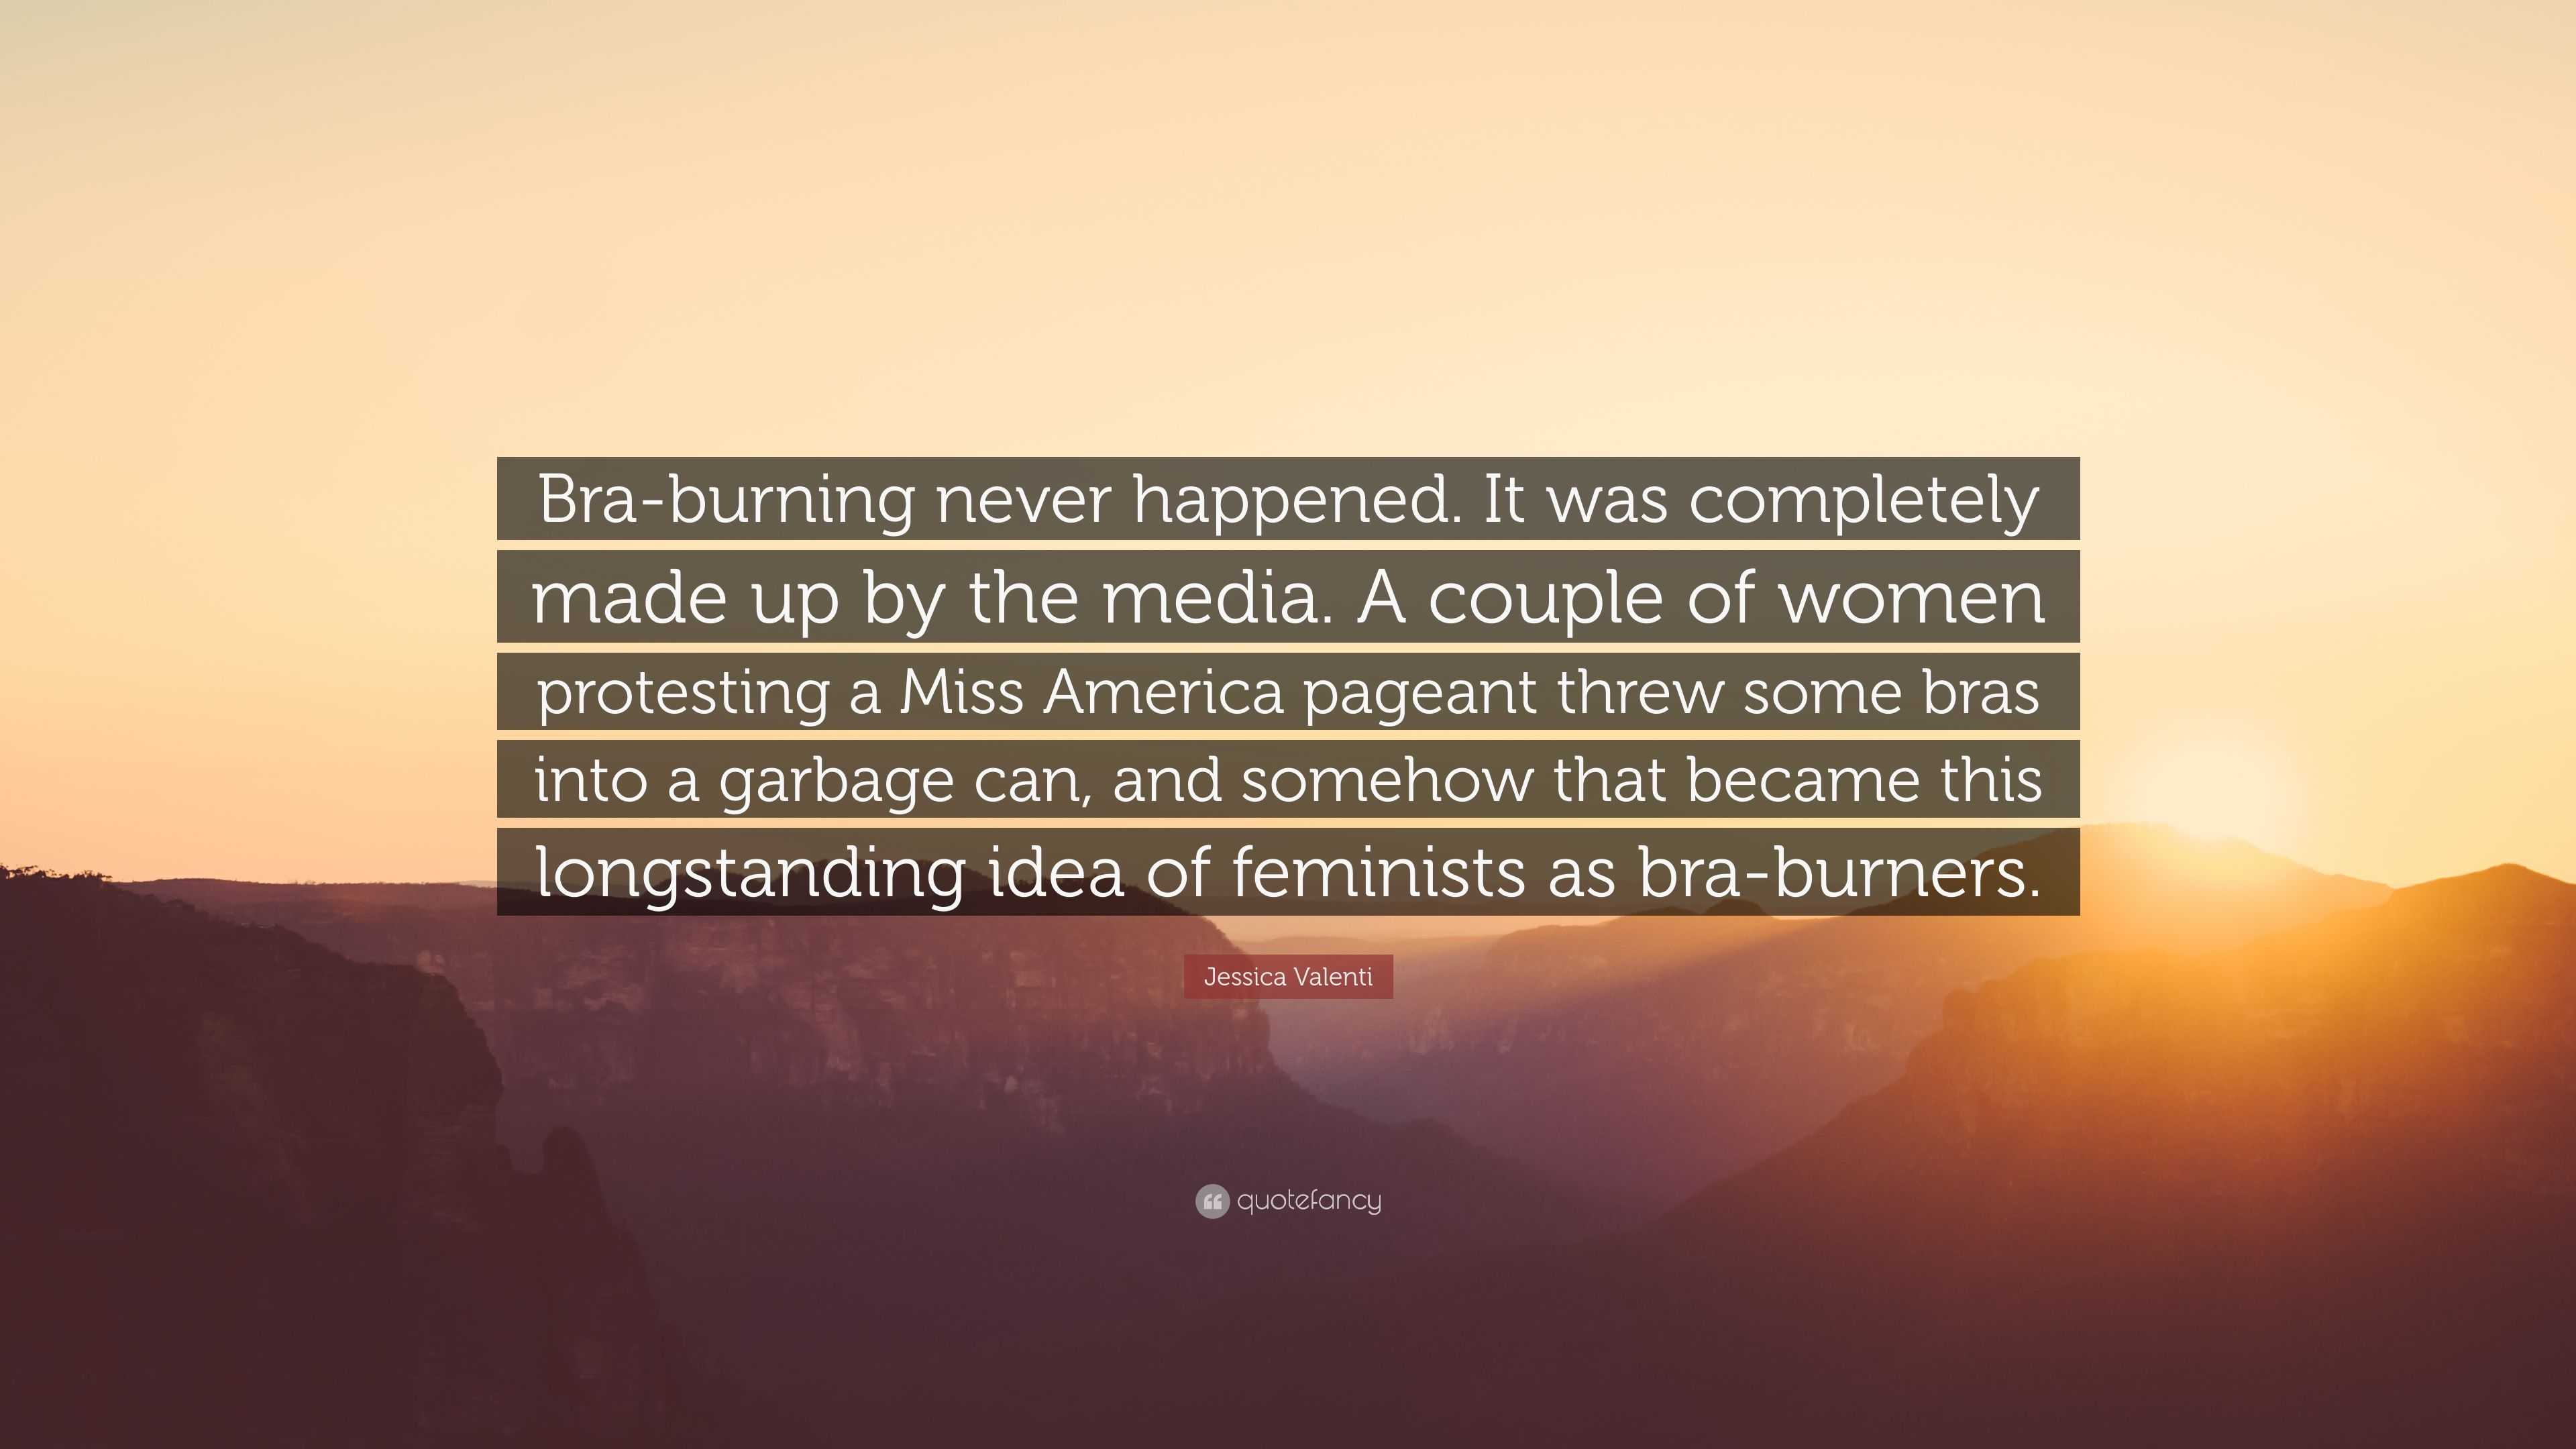 Jessica Valenti Quote: “Bra-burning never happened. It was completely made  up by the media. A couple of women protesting a Miss America pageant ”